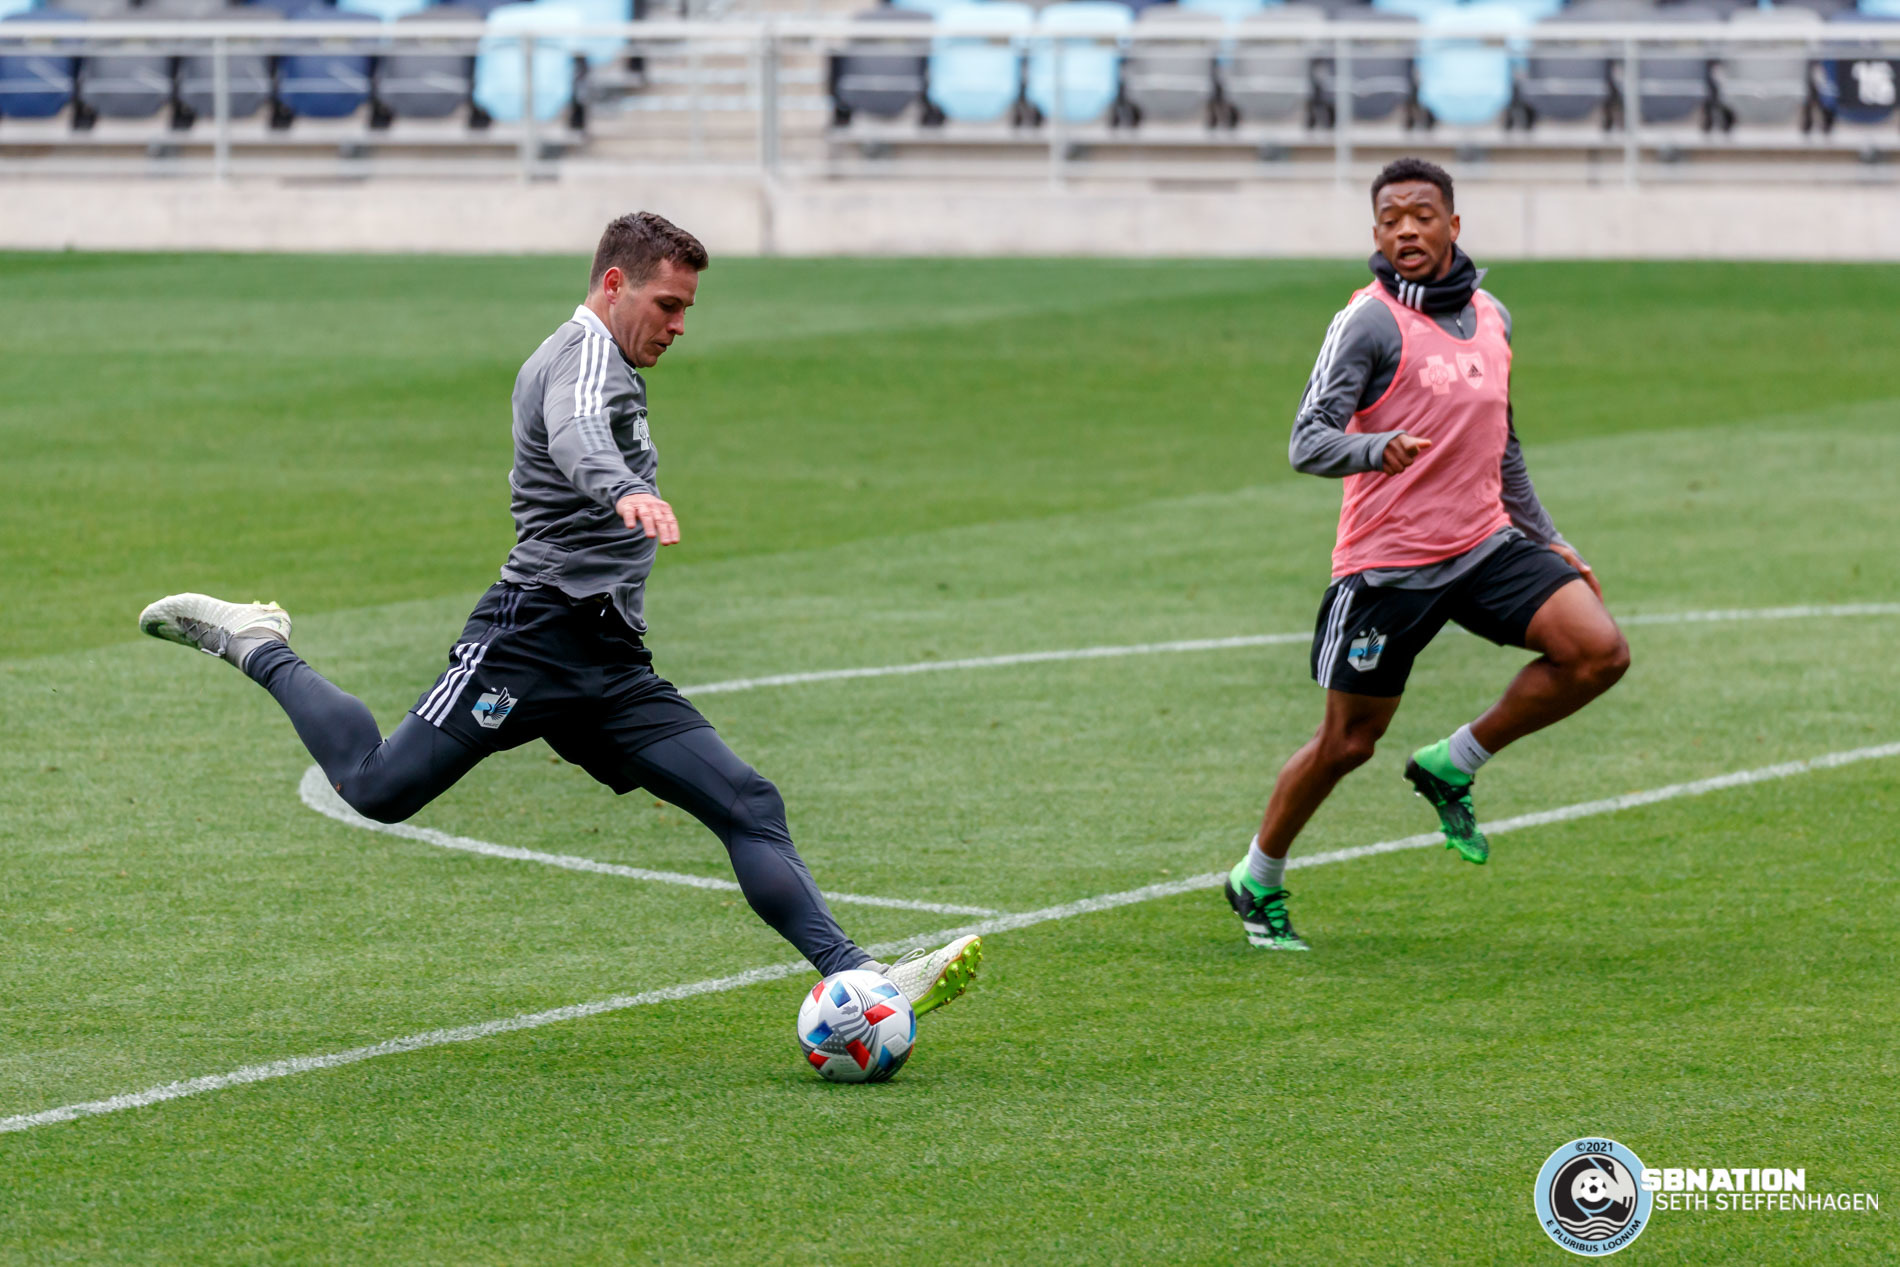 April 20, 2021 - Saint Paul, Minnesota, United States - Minnesota United midfielder Foster Langsdorf (27) takes a shot on goal during the Loon’s first team training session at Allianz Field.